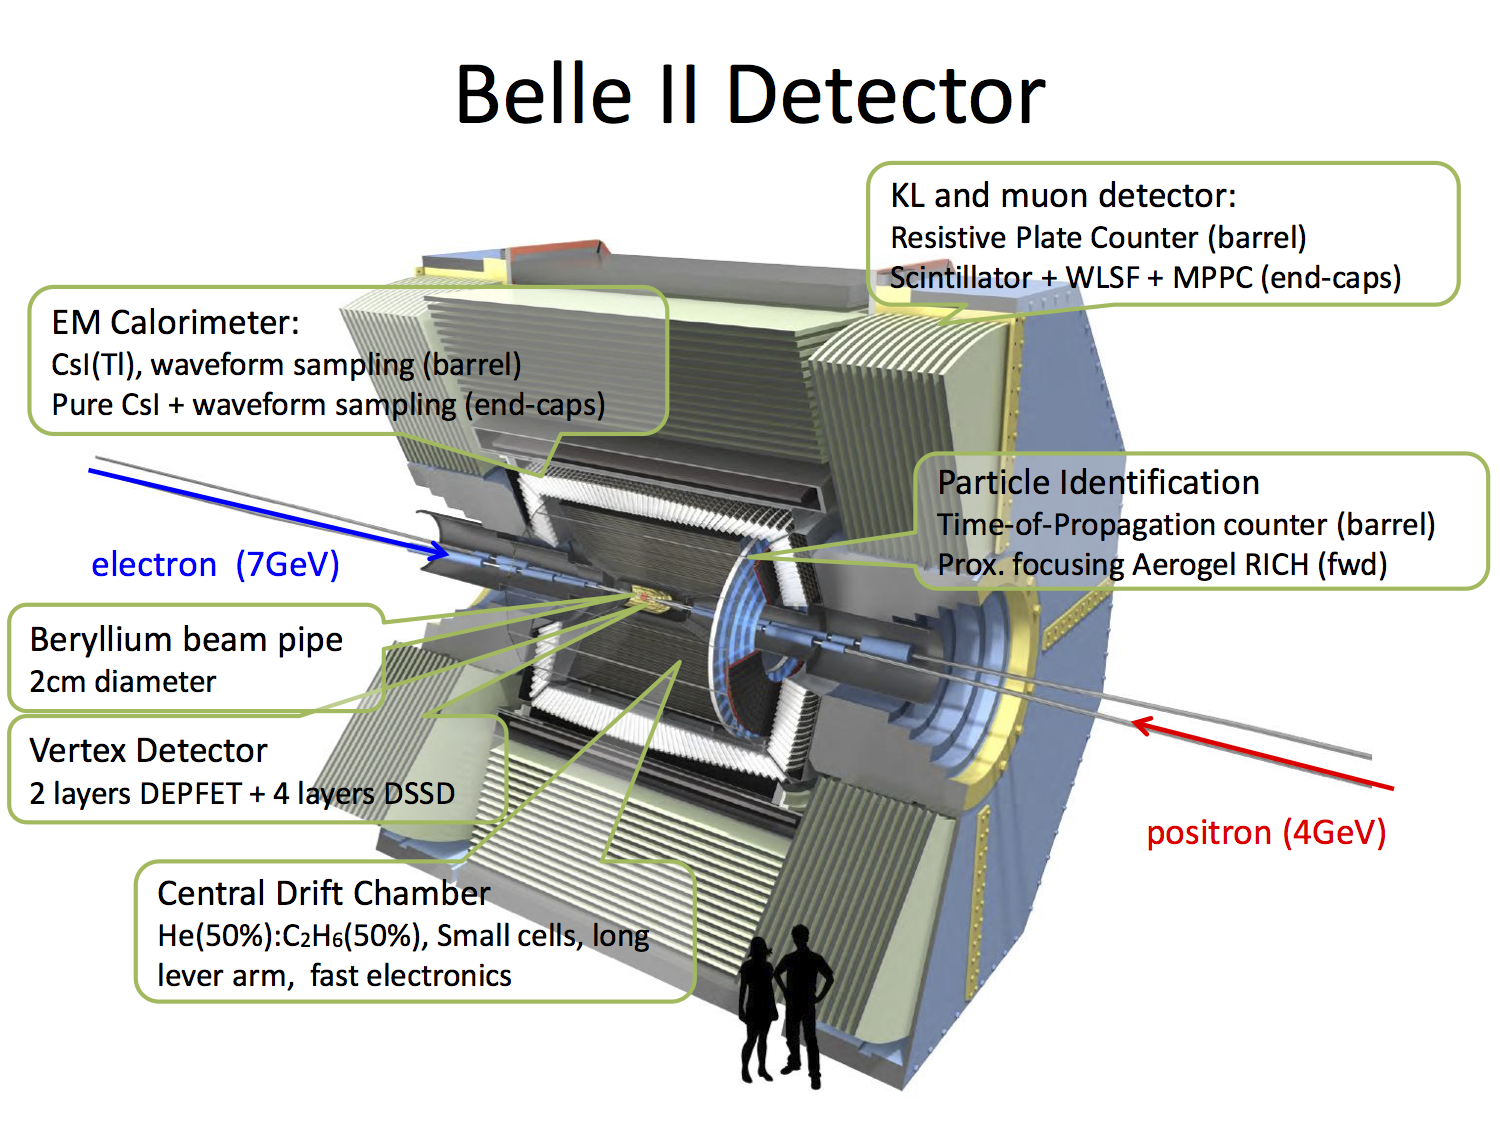 Drawing of the Belle II detector